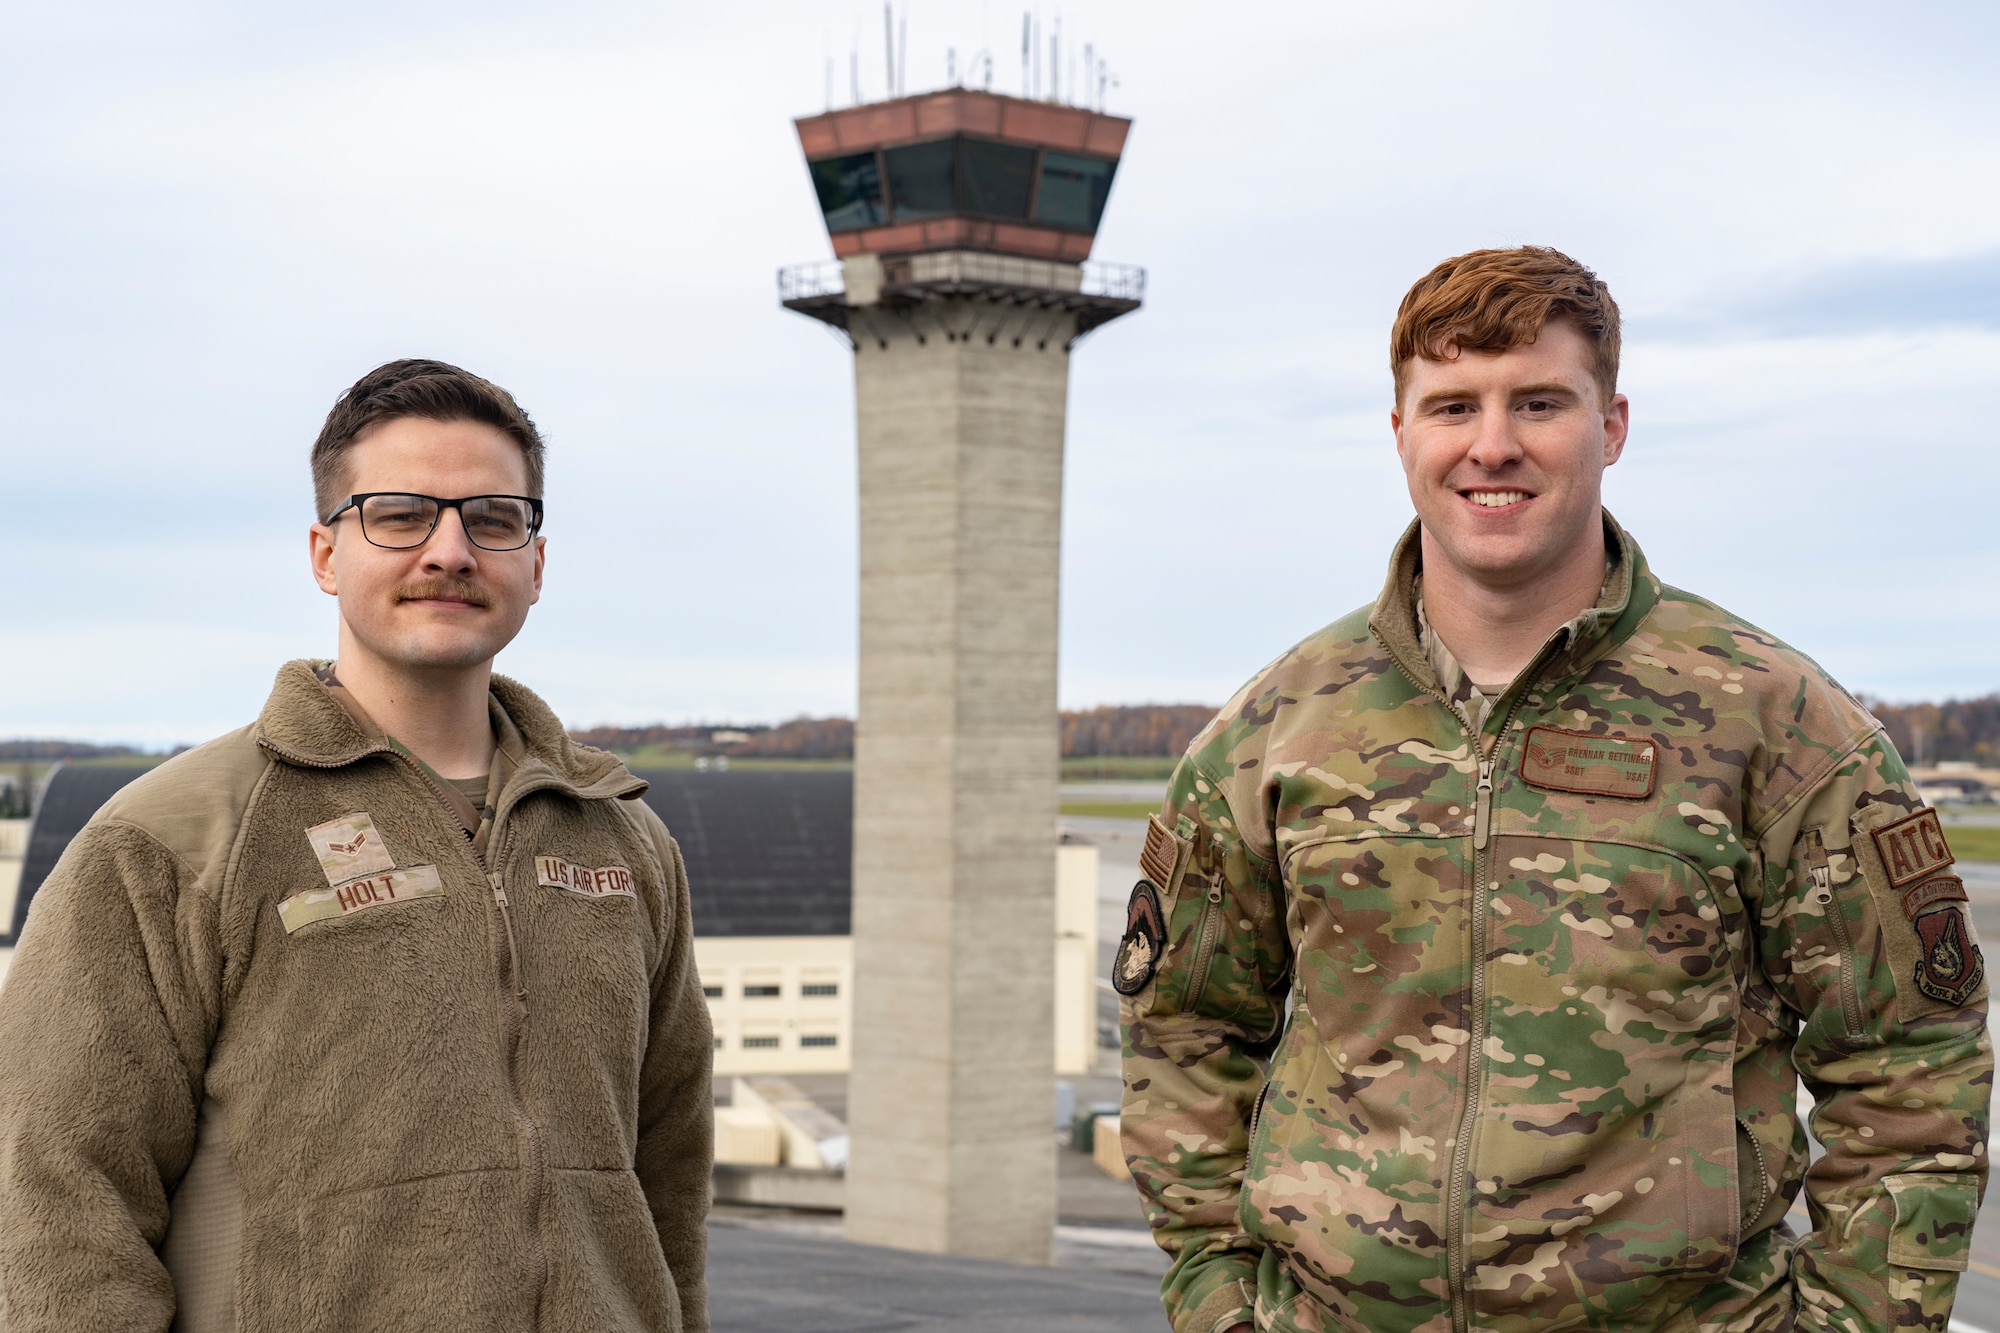 A photo of A1C Ean Holt and Staff Sgt. Brennan Gettinger posing by the ATC tower.